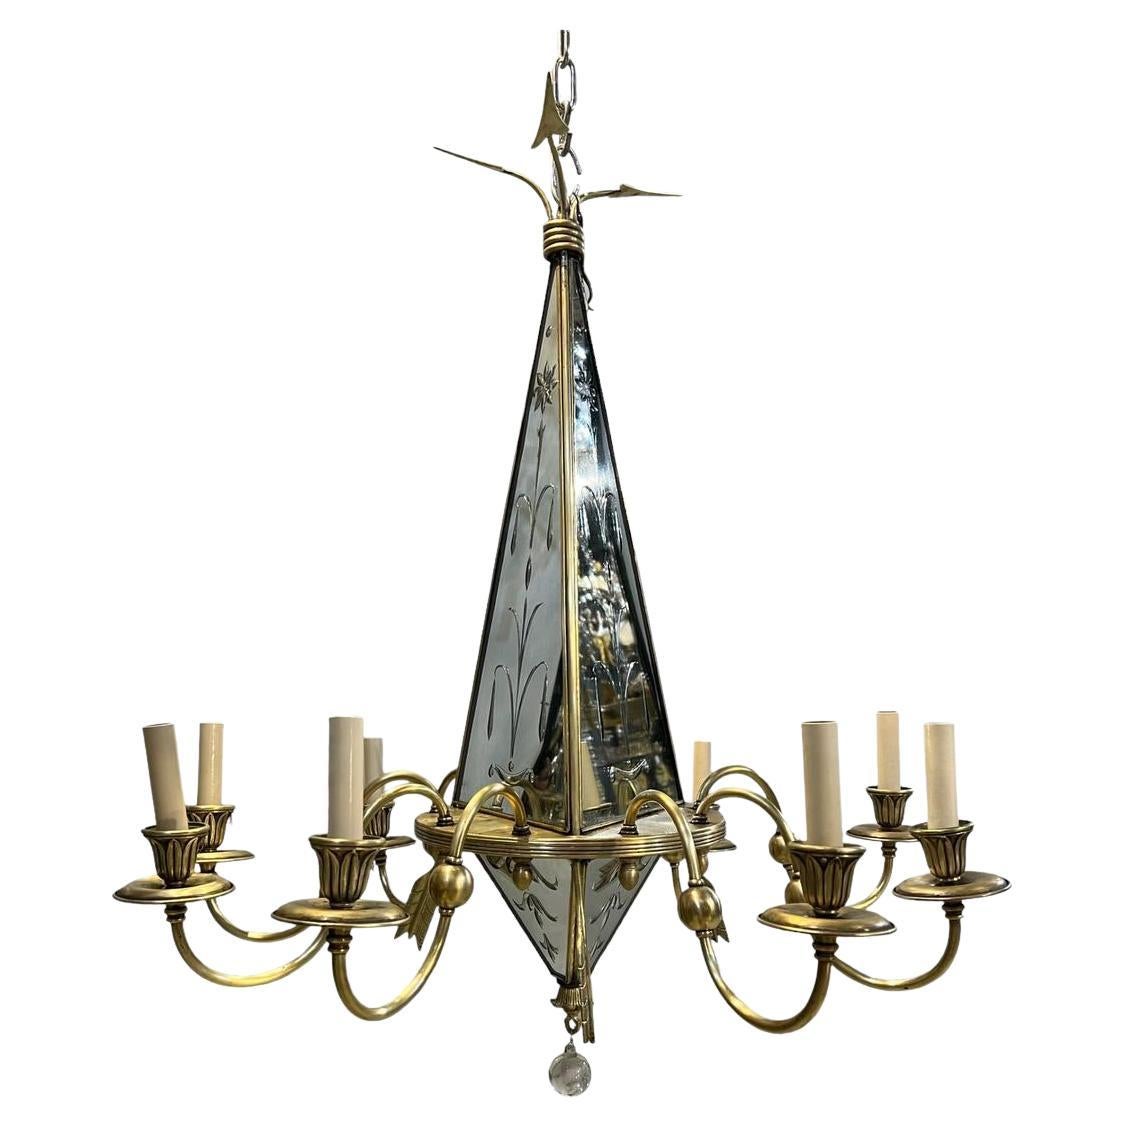 1930’s French Etched Mirrored and Bronze Chandelier